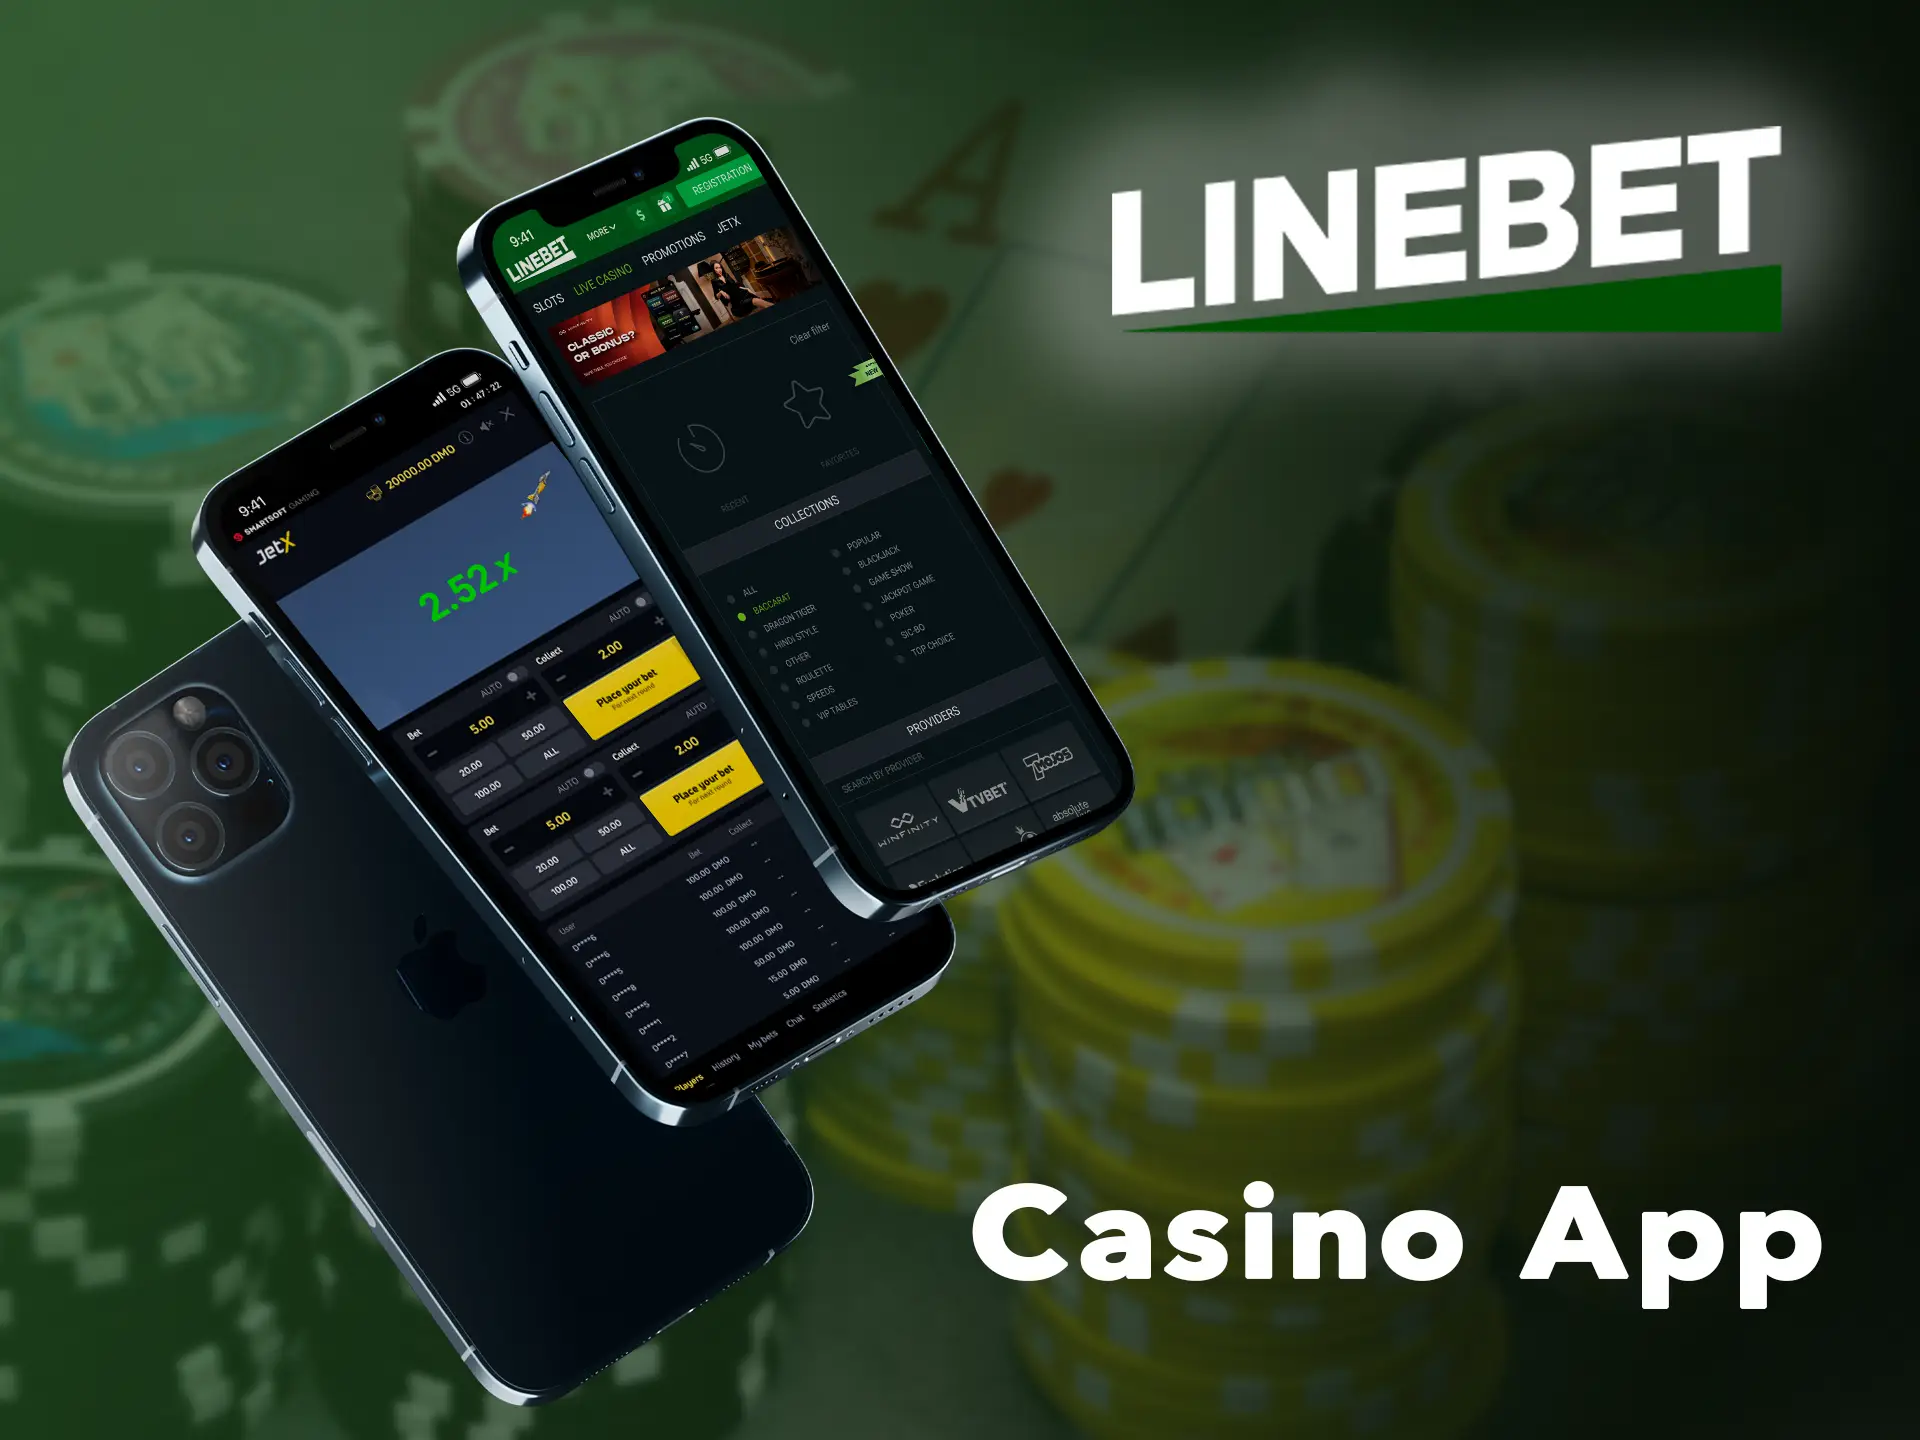 You will get the same Linebet website interface but more compact, more ergonomic and you can play anywhere in the world.